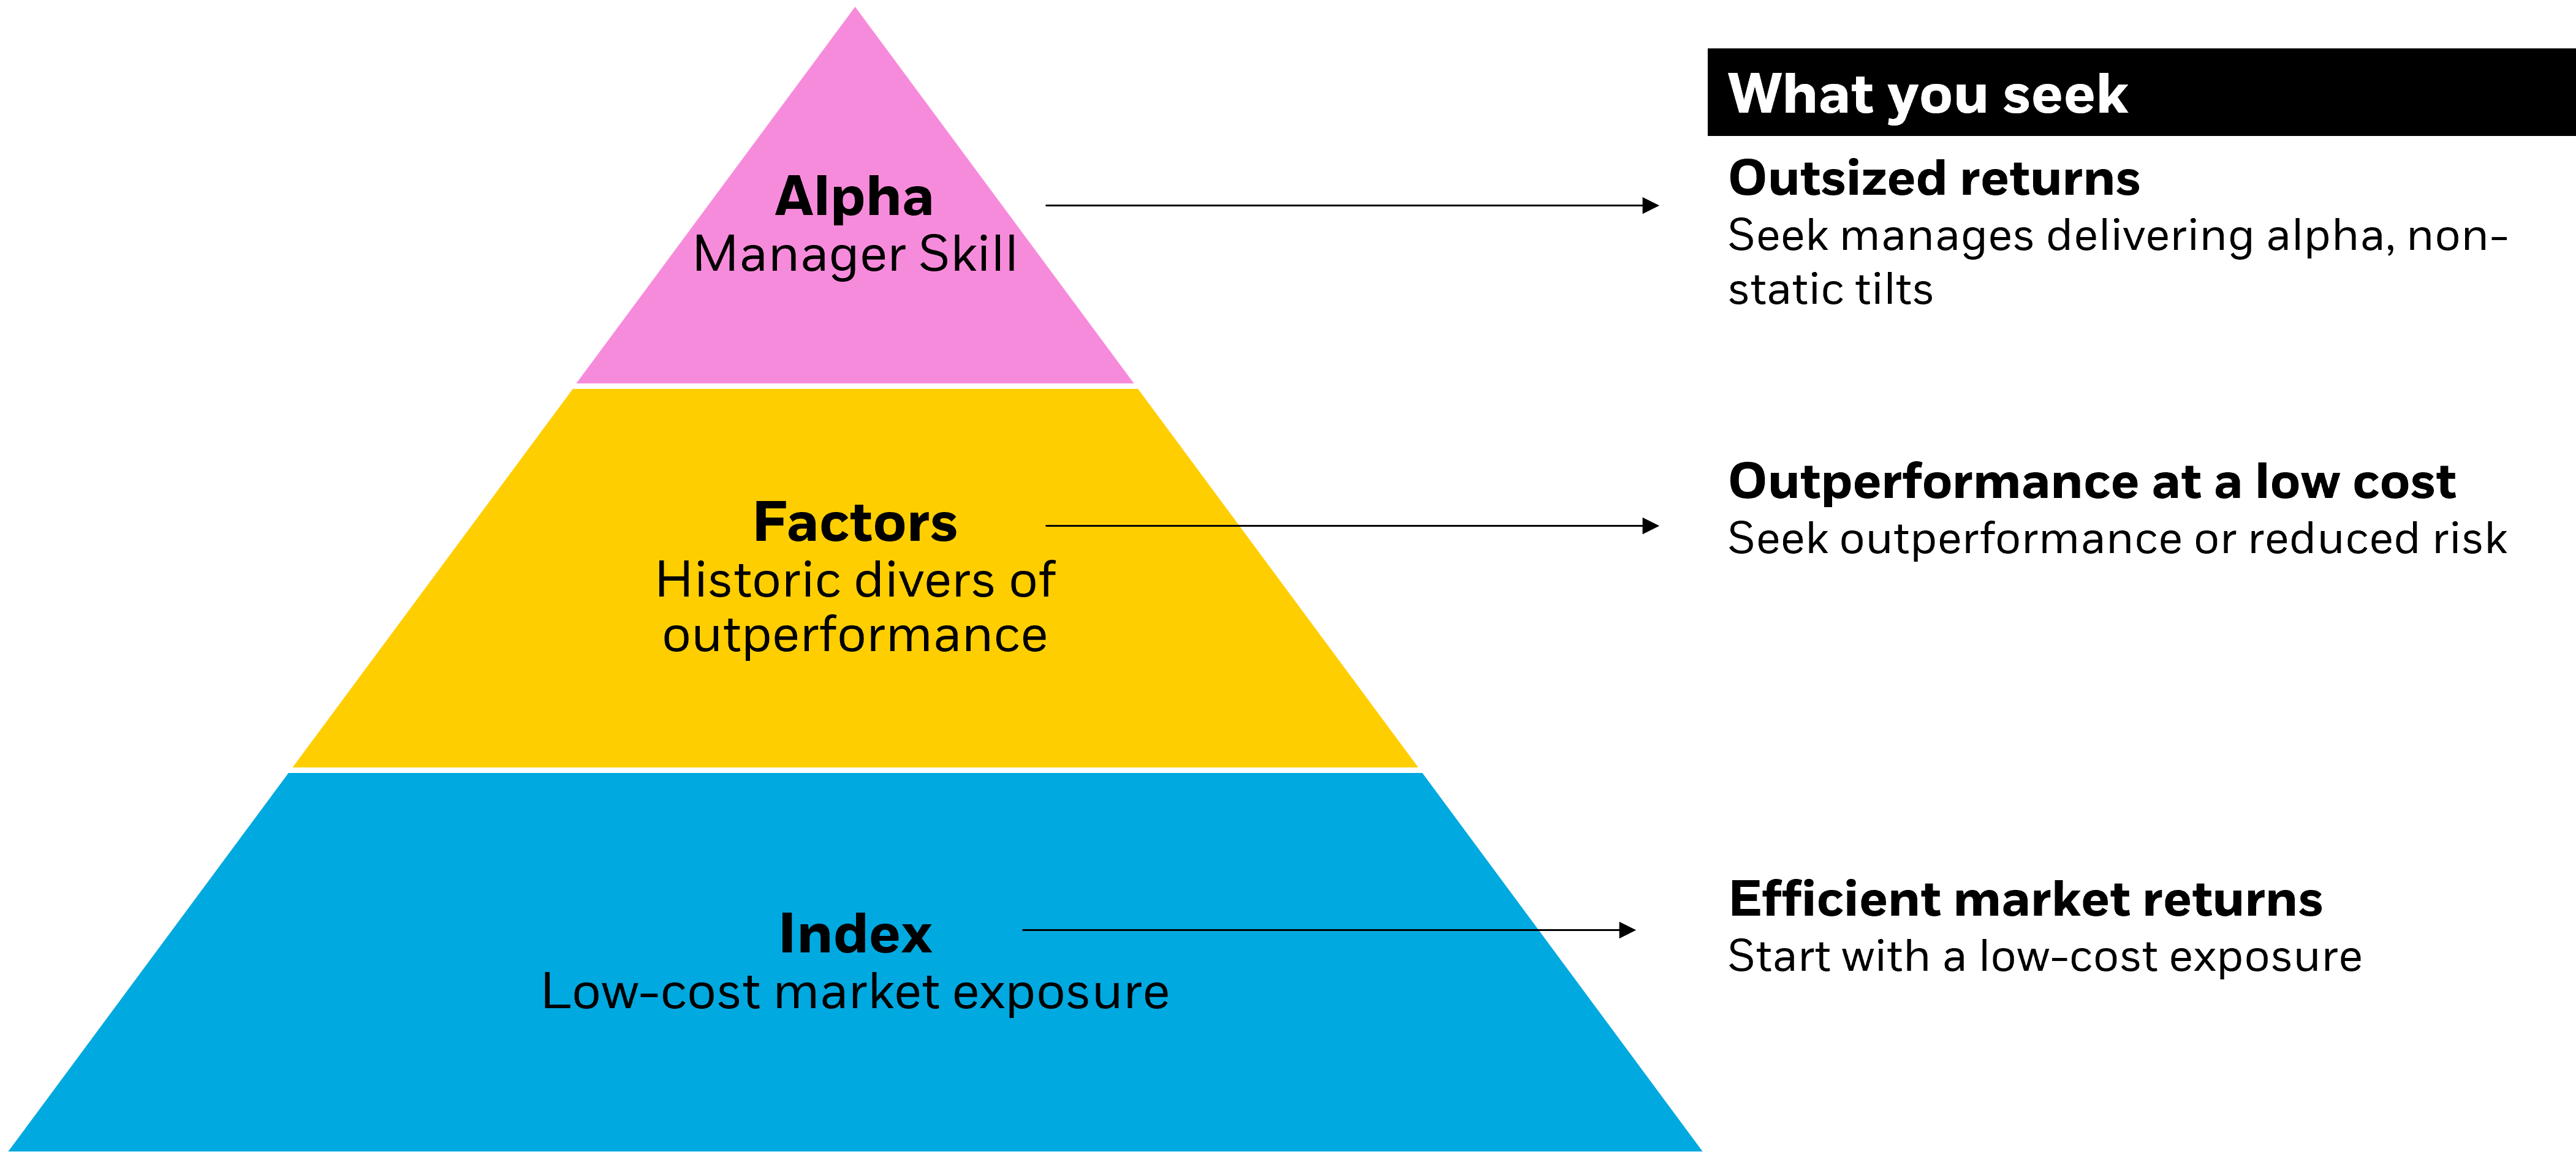 Triangle indicating different types of investment goals and solutions